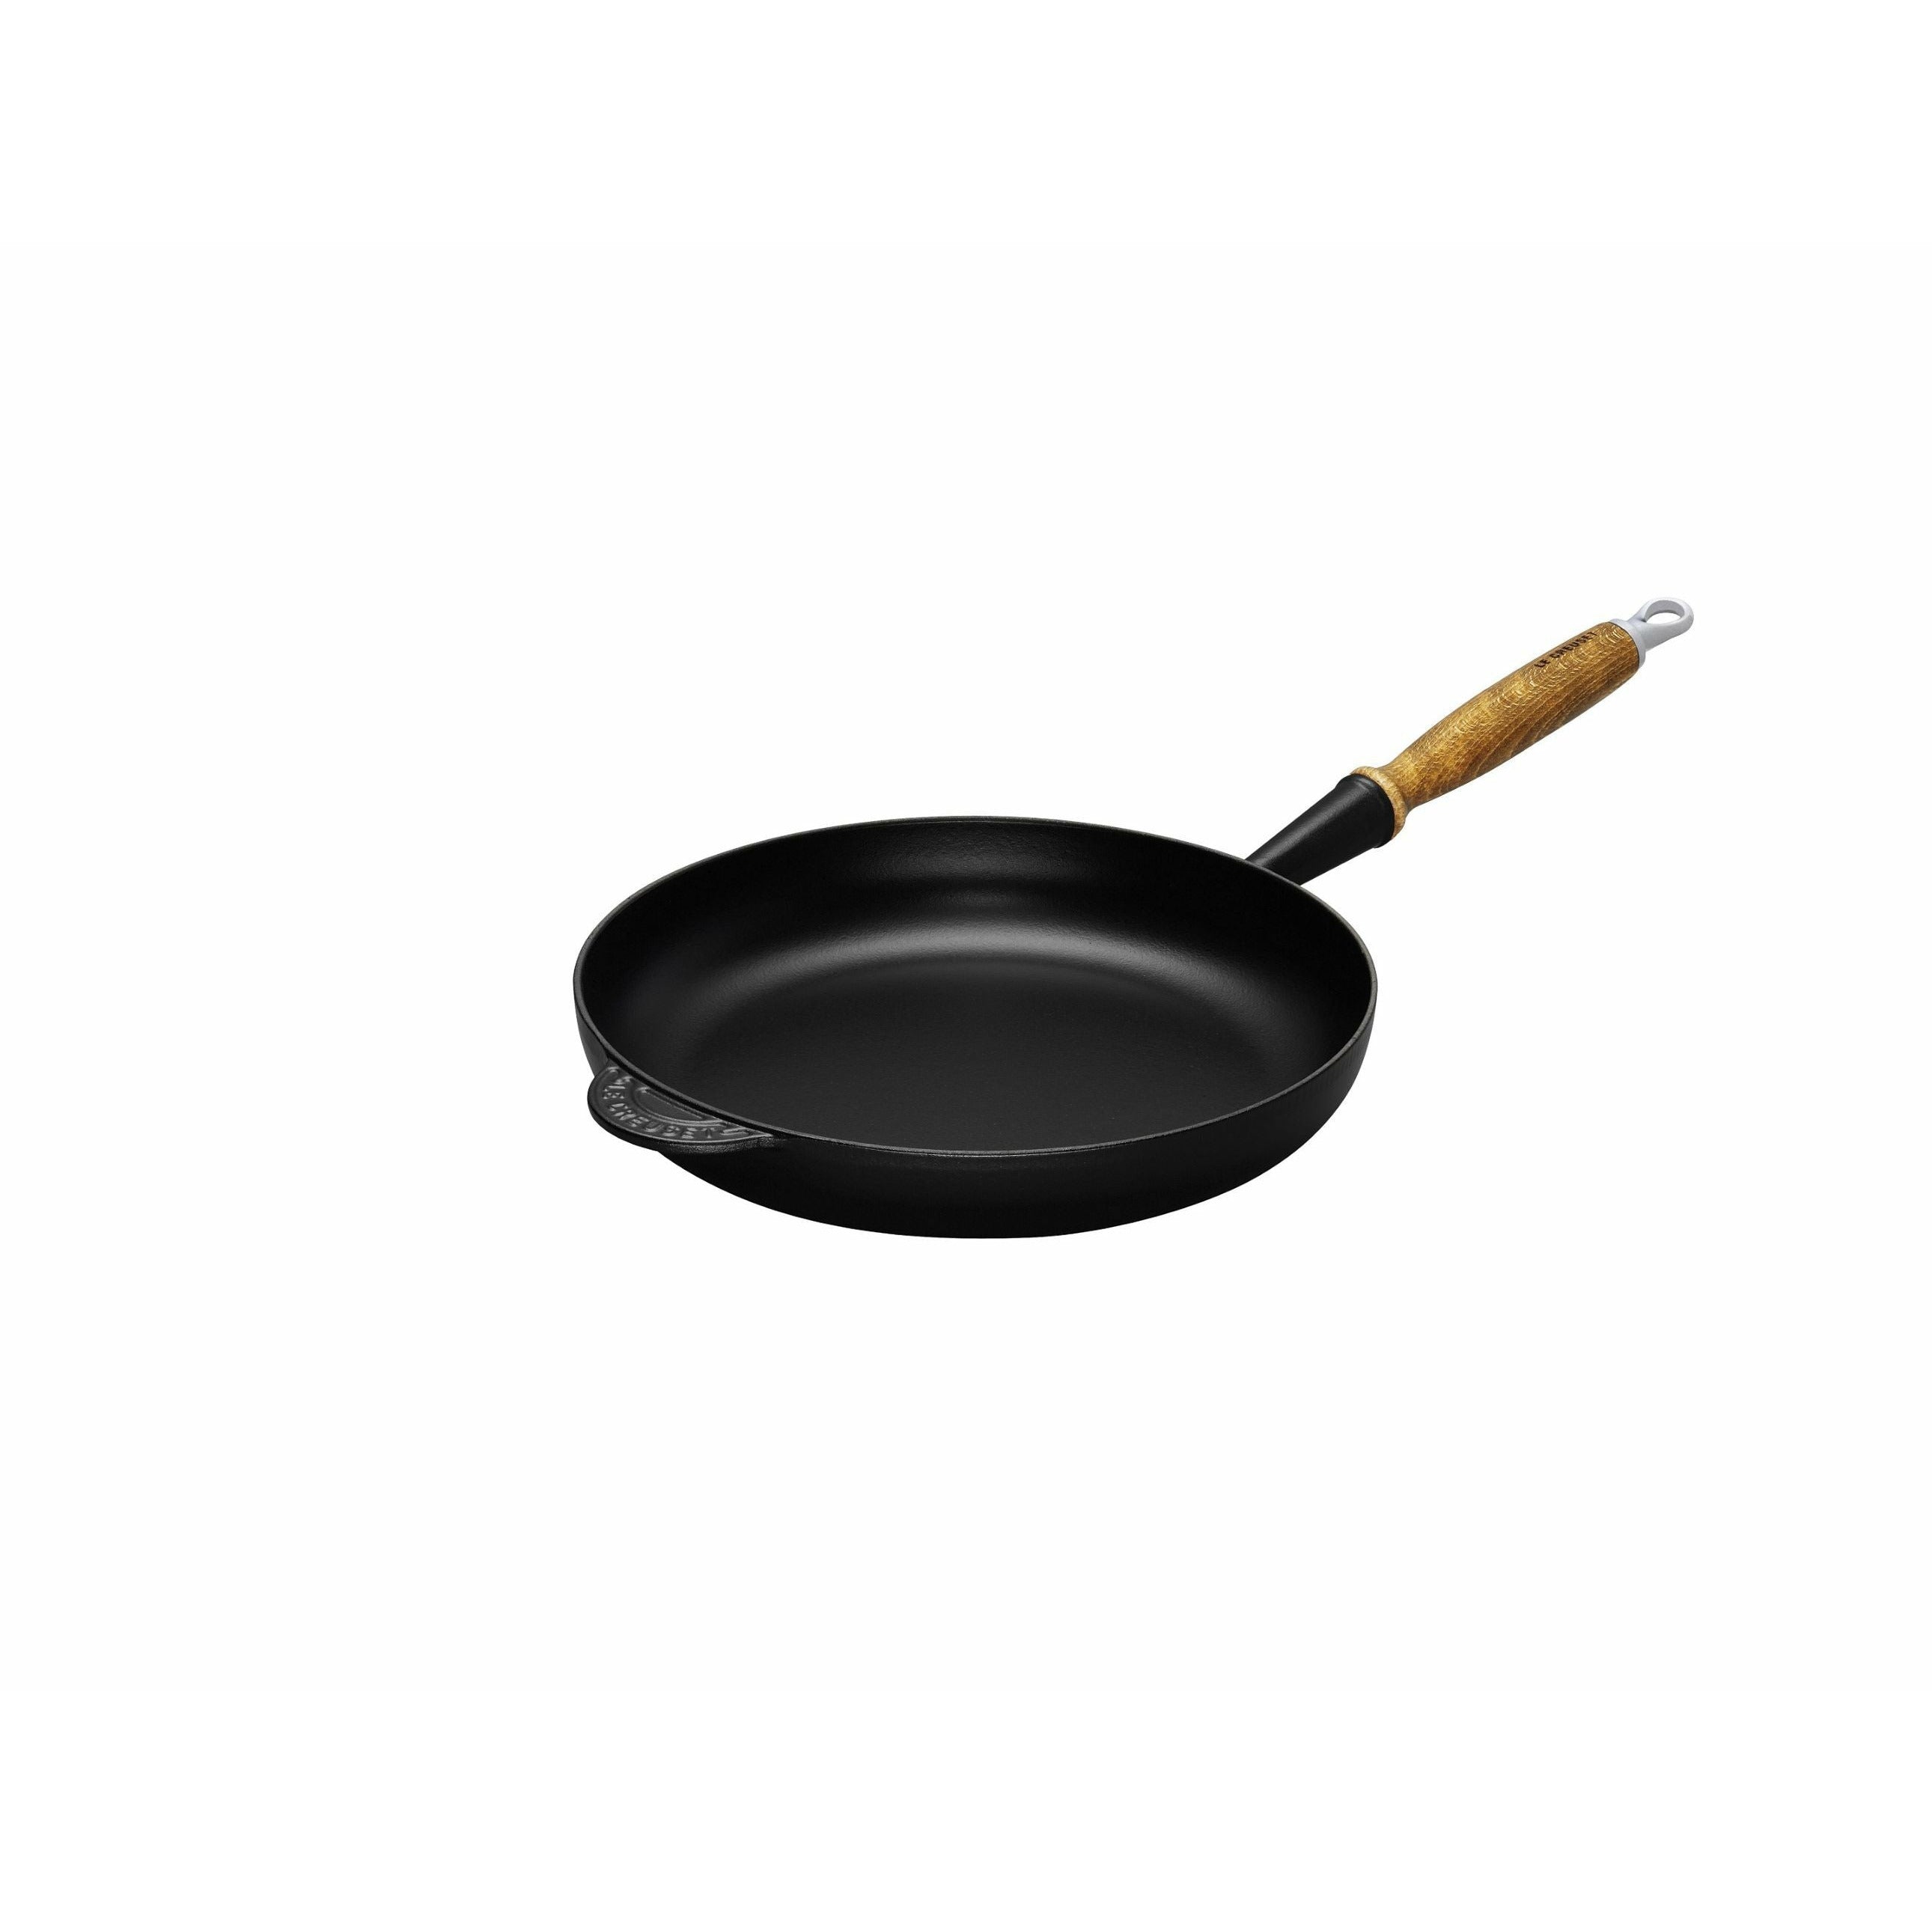 Le Creuset Tradition Frying Pan With Wooden Handle 26 Cm, Black